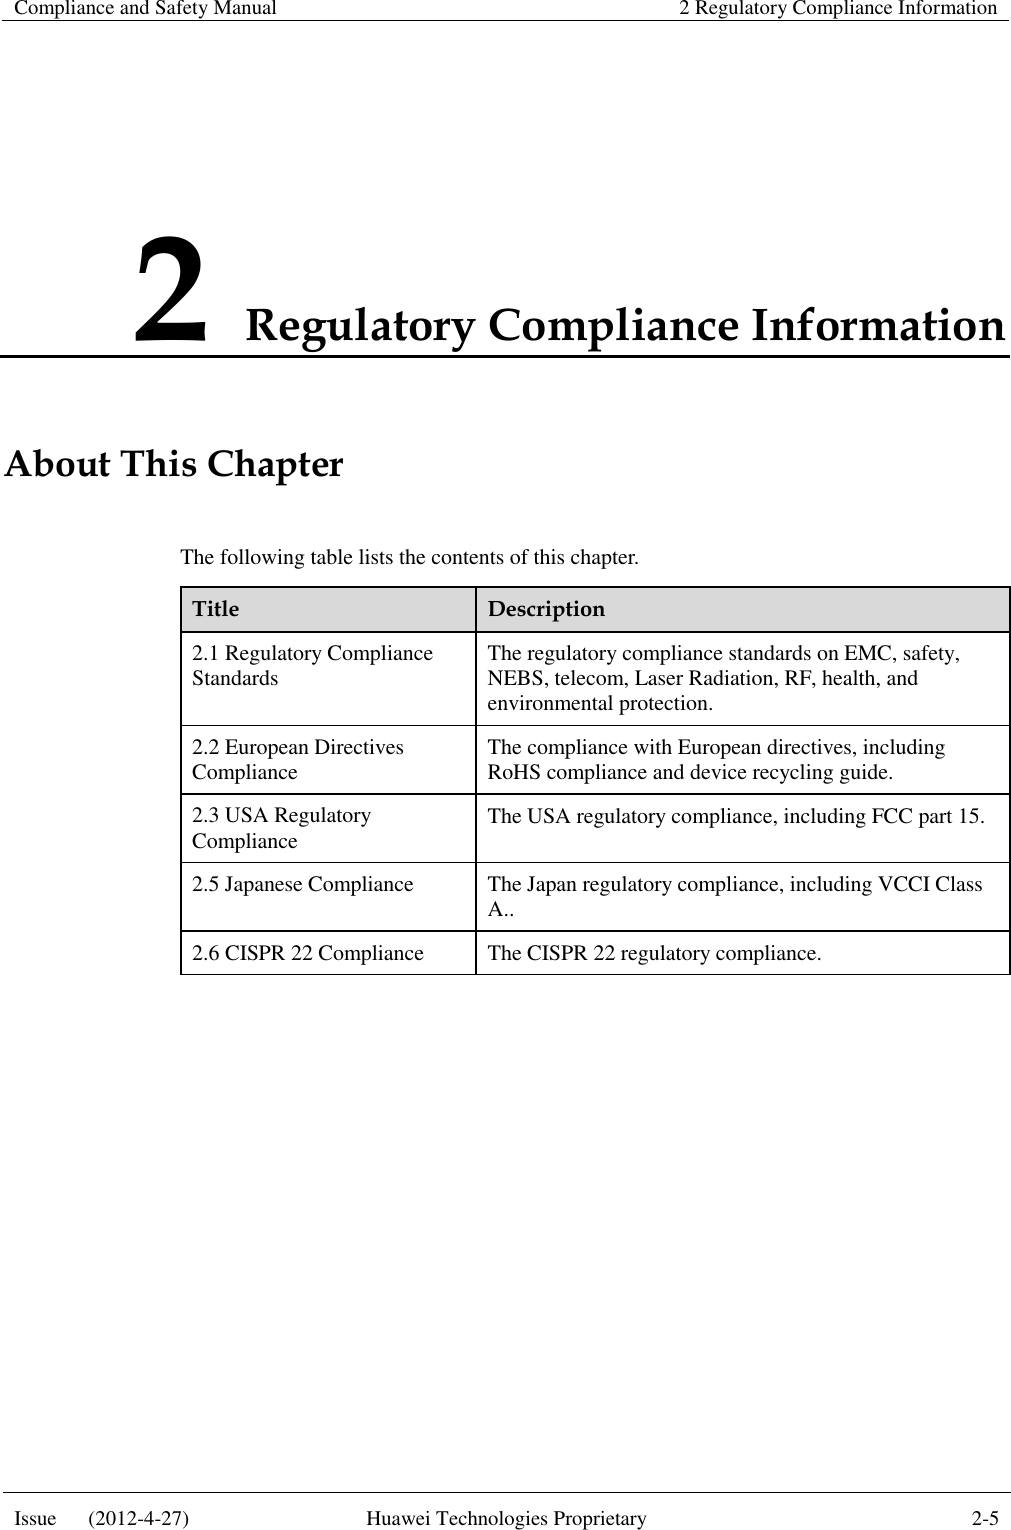 Compliance and Safety Manual 2 Regulatory Compliance Information  Issue      (2012-4-27) Huawei Technologies Proprietary 2-5  2 Regulatory Compliance Information About This Chapter The following table lists the contents of this chapter. Title Description 2.1 Regulatory Compliance Standards The regulatory compliance standards on EMC, safety, NEBS, telecom, Laser Radiation, RF, health, and environmental protection. 2.2 European Directives Compliance The compliance with European directives, including RoHS compliance and device recycling guide. 2.3 USA Regulatory Compliance The USA regulatory compliance, including FCC part 15. 2.5 Japanese Compliance The Japan regulatory compliance, including VCCI Class A.. 2.6 CISPR 22 Compliance The CISPR 22 regulatory compliance.  